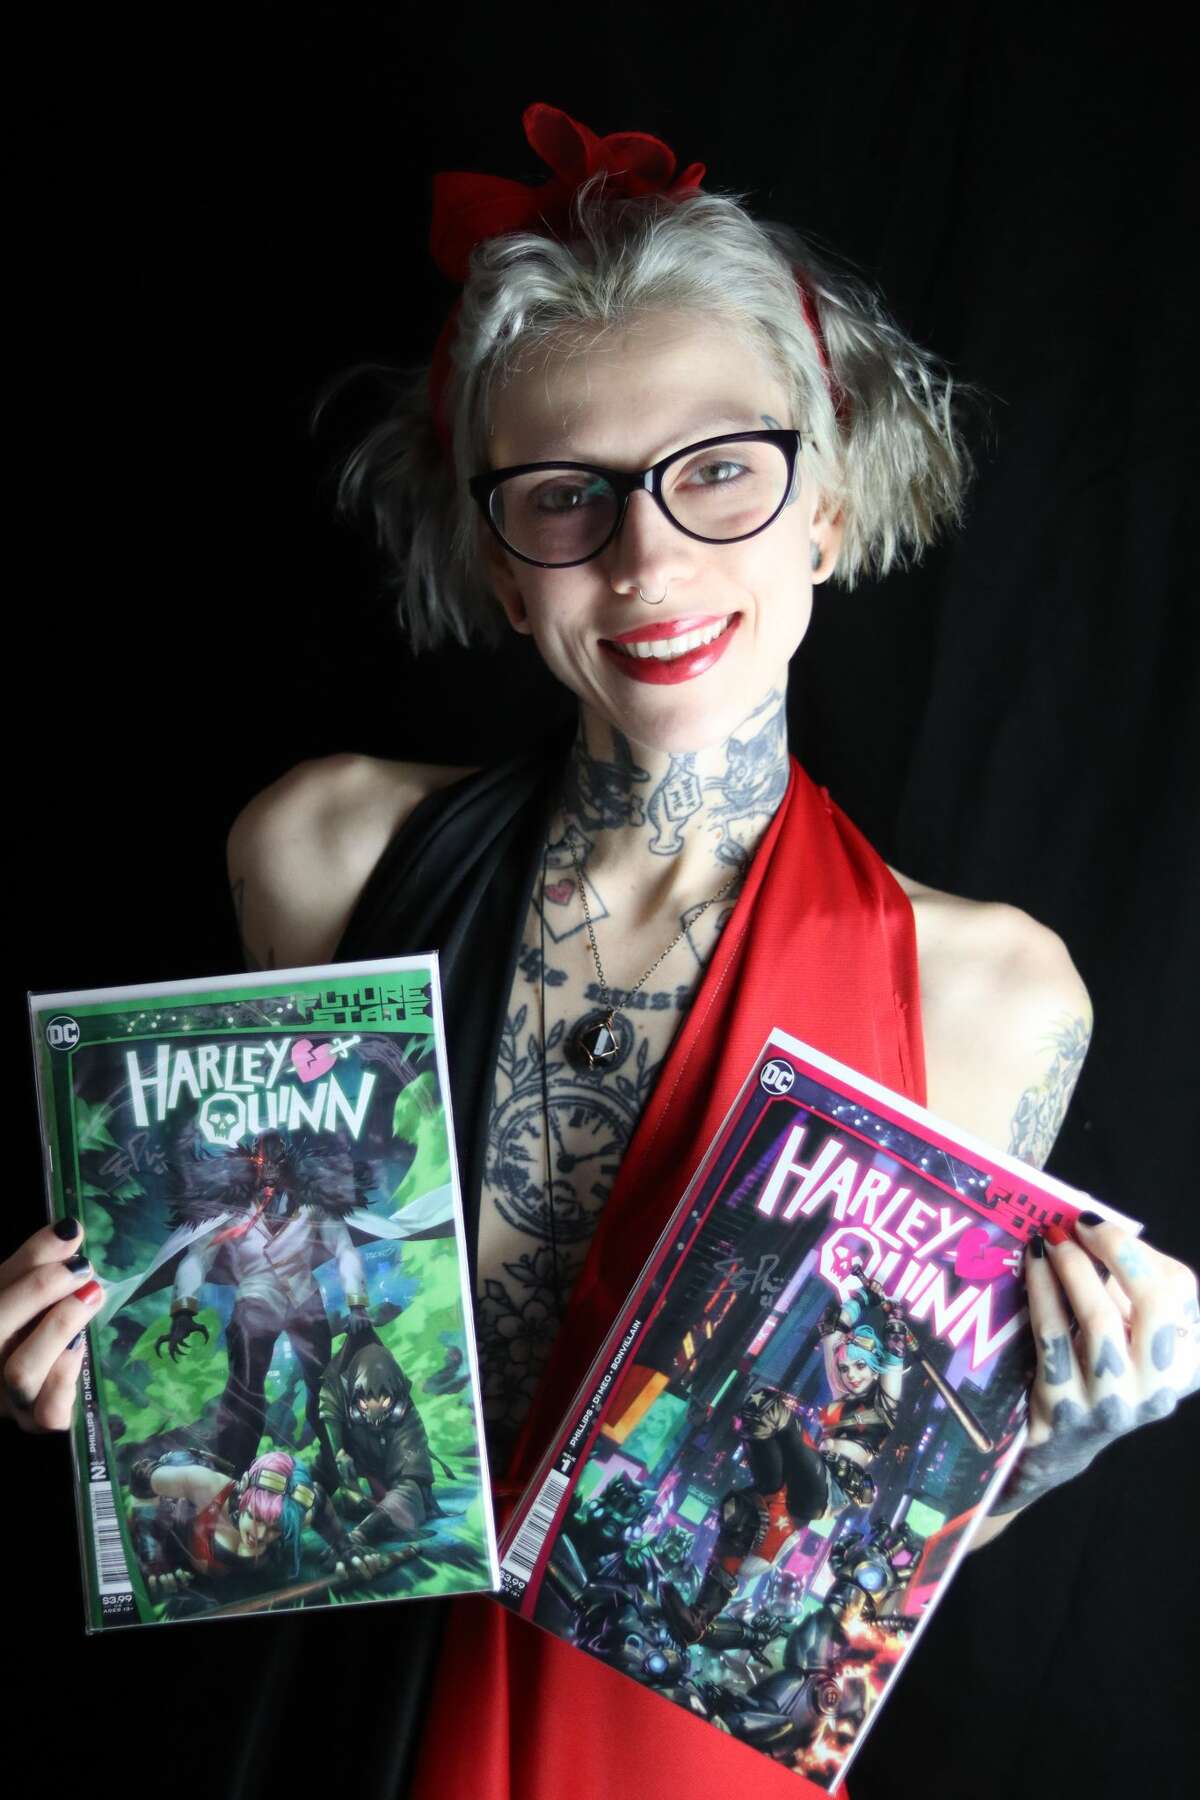 Janna aka Sweetheart.Harley, holds copies donated and autographed by author Stephanie Phillips, that are being raffled to benefit the National Coalition Against Domestic Violence